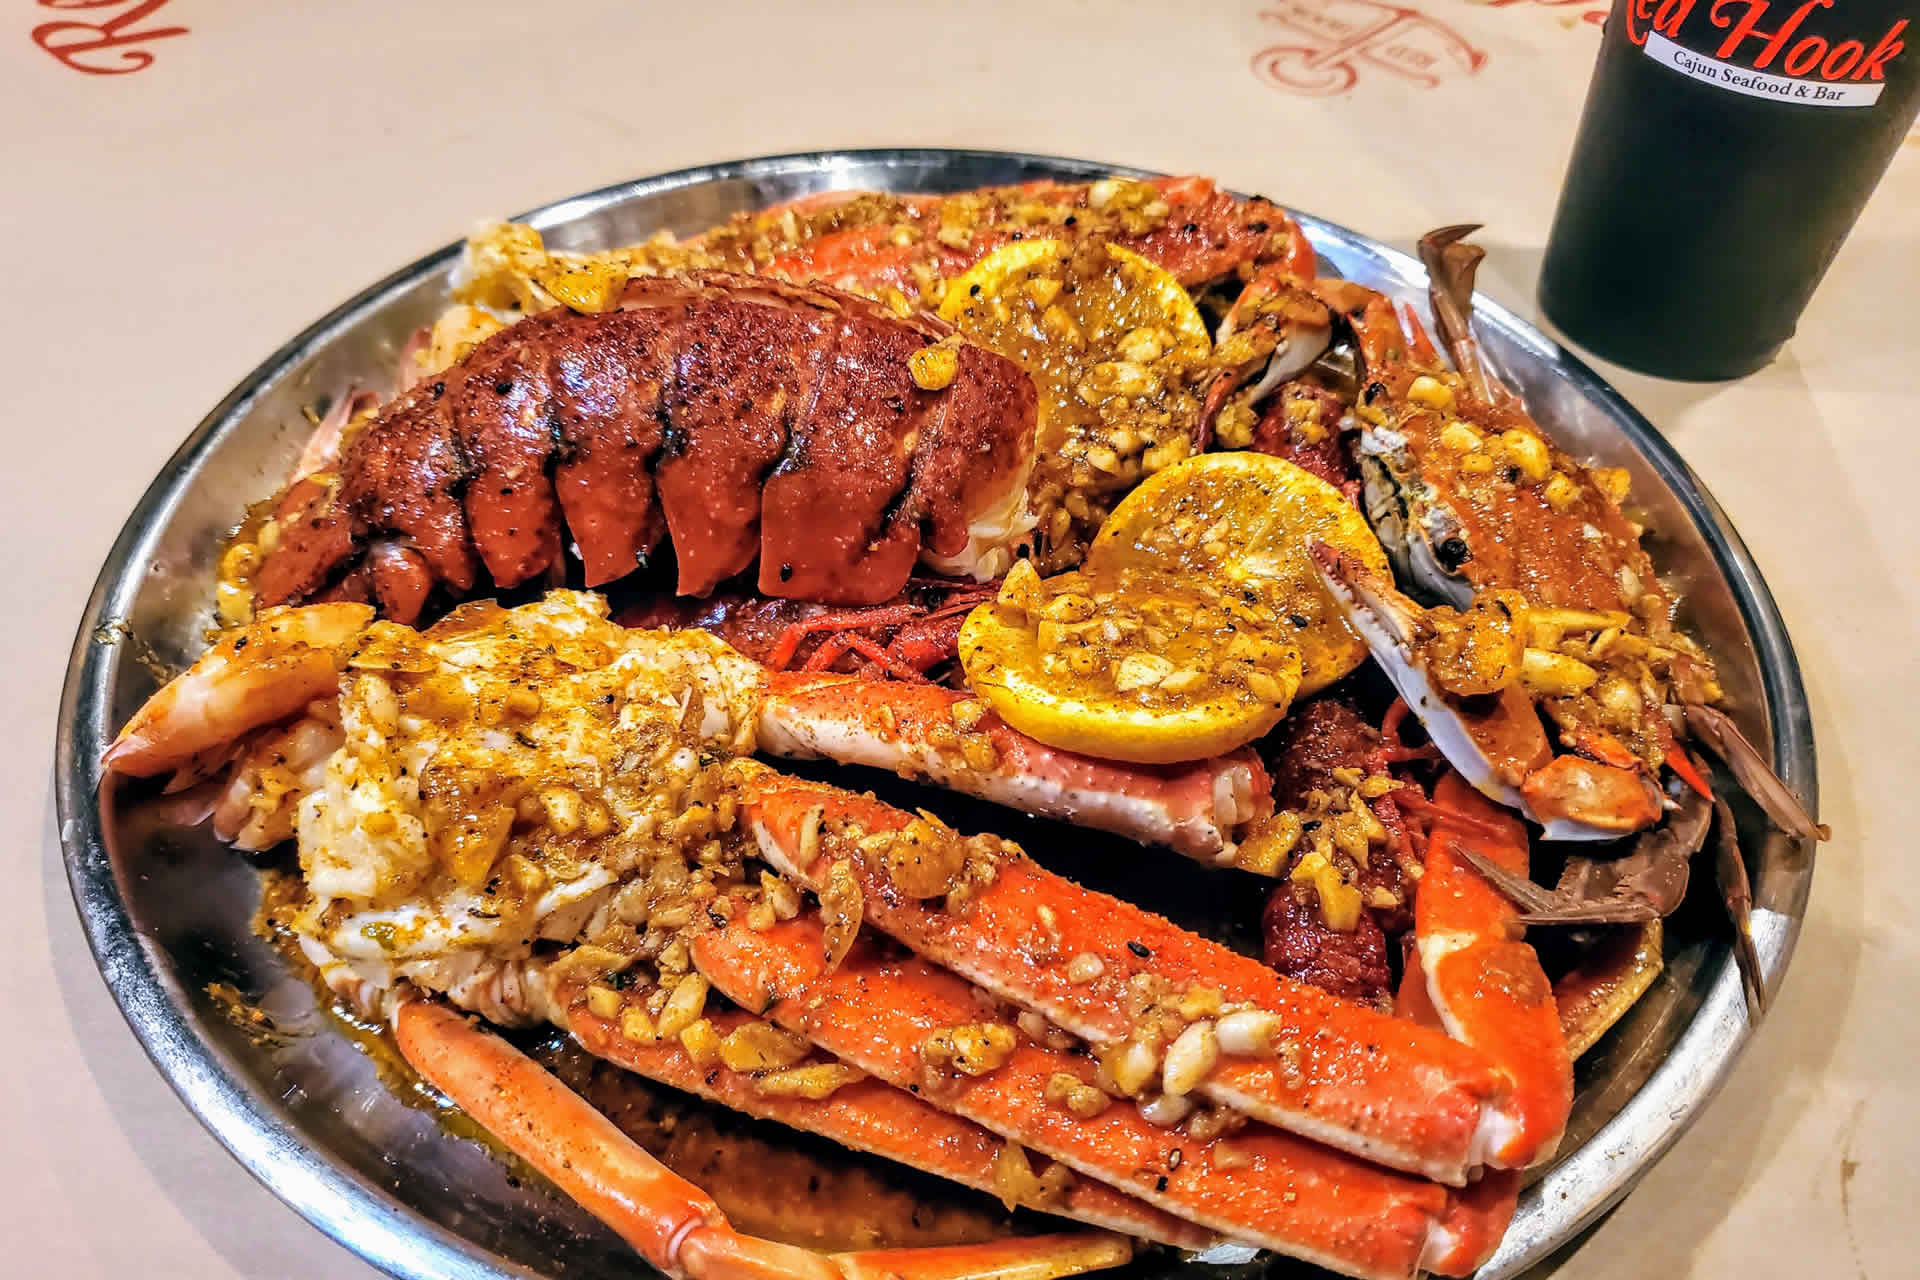 Rockport Seafood Restaurant With Cajun Flavor - The Boiling Pot